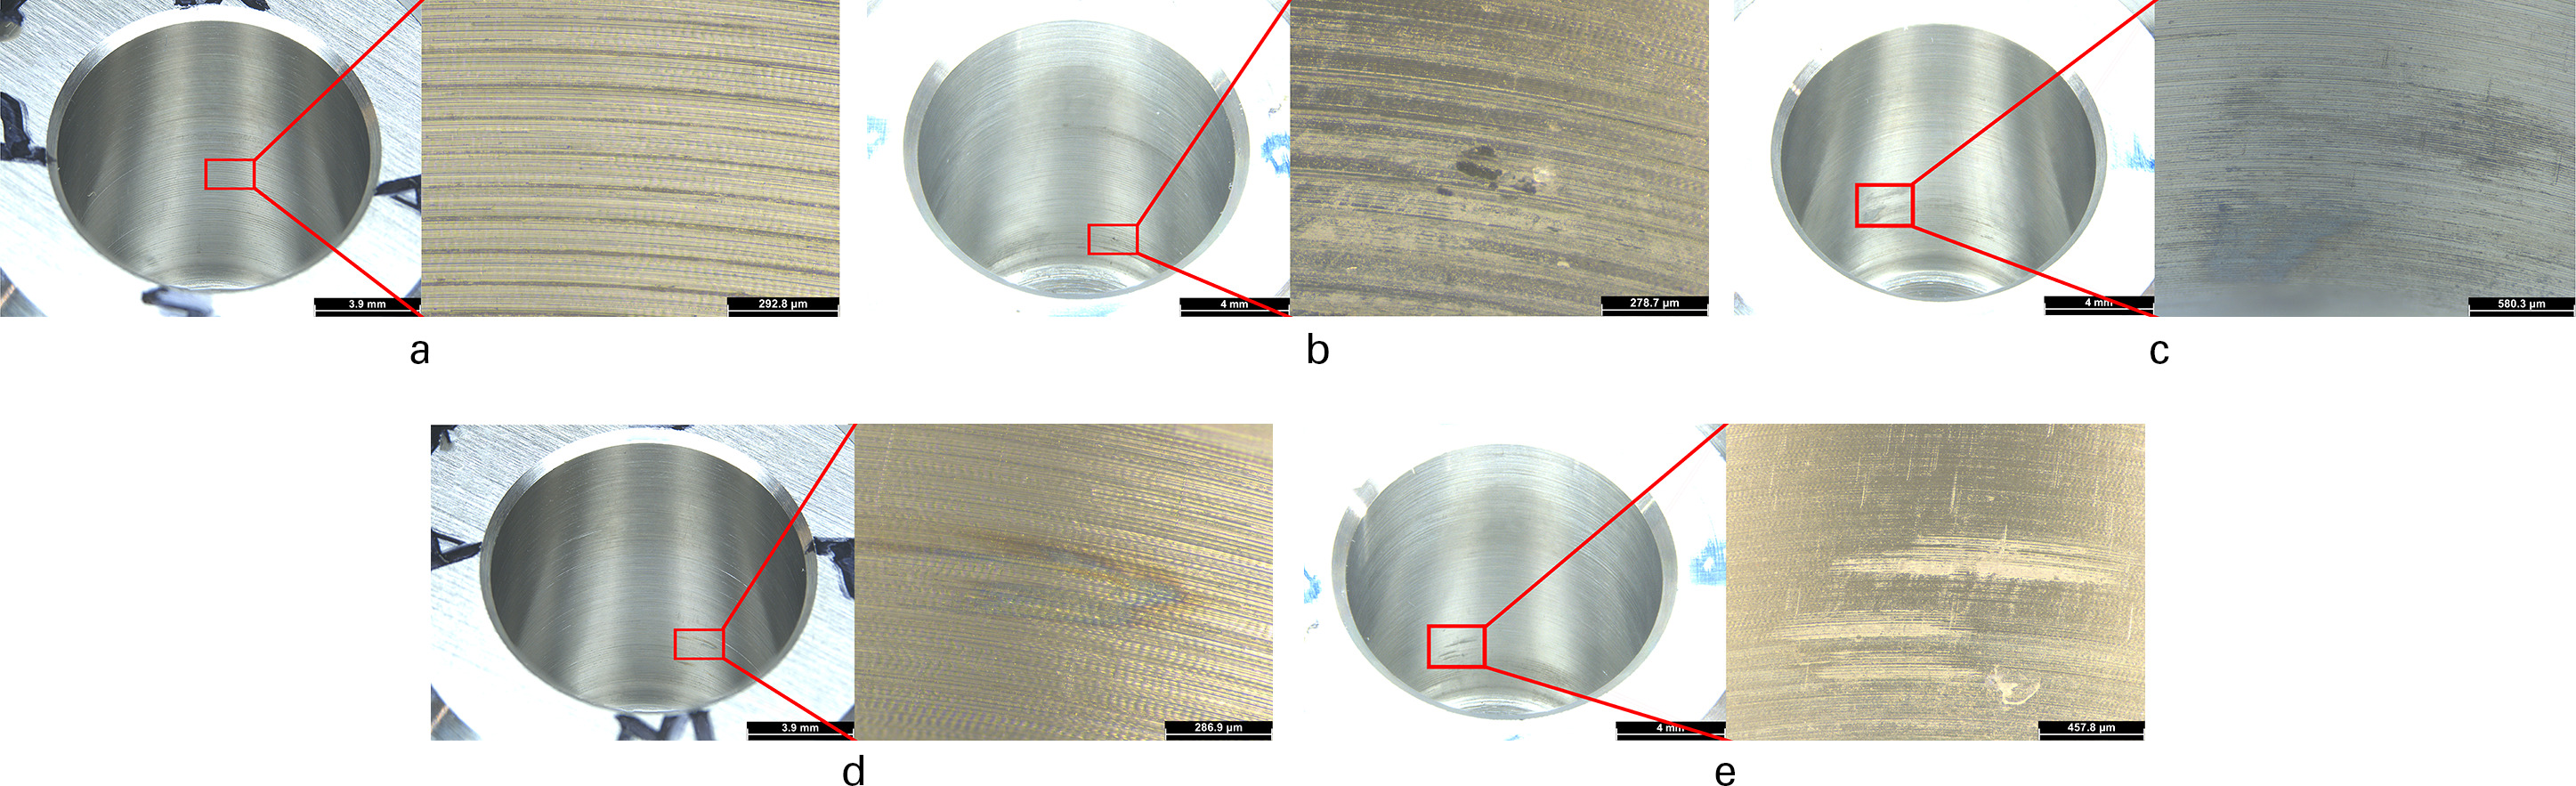 Fig. 8 
          Microscope images of head taper damage modes. a) Imprinting, b) pitting, c) darkened discoloration, d) ‘oil-slick’ discoloration, and e) fretting,
        